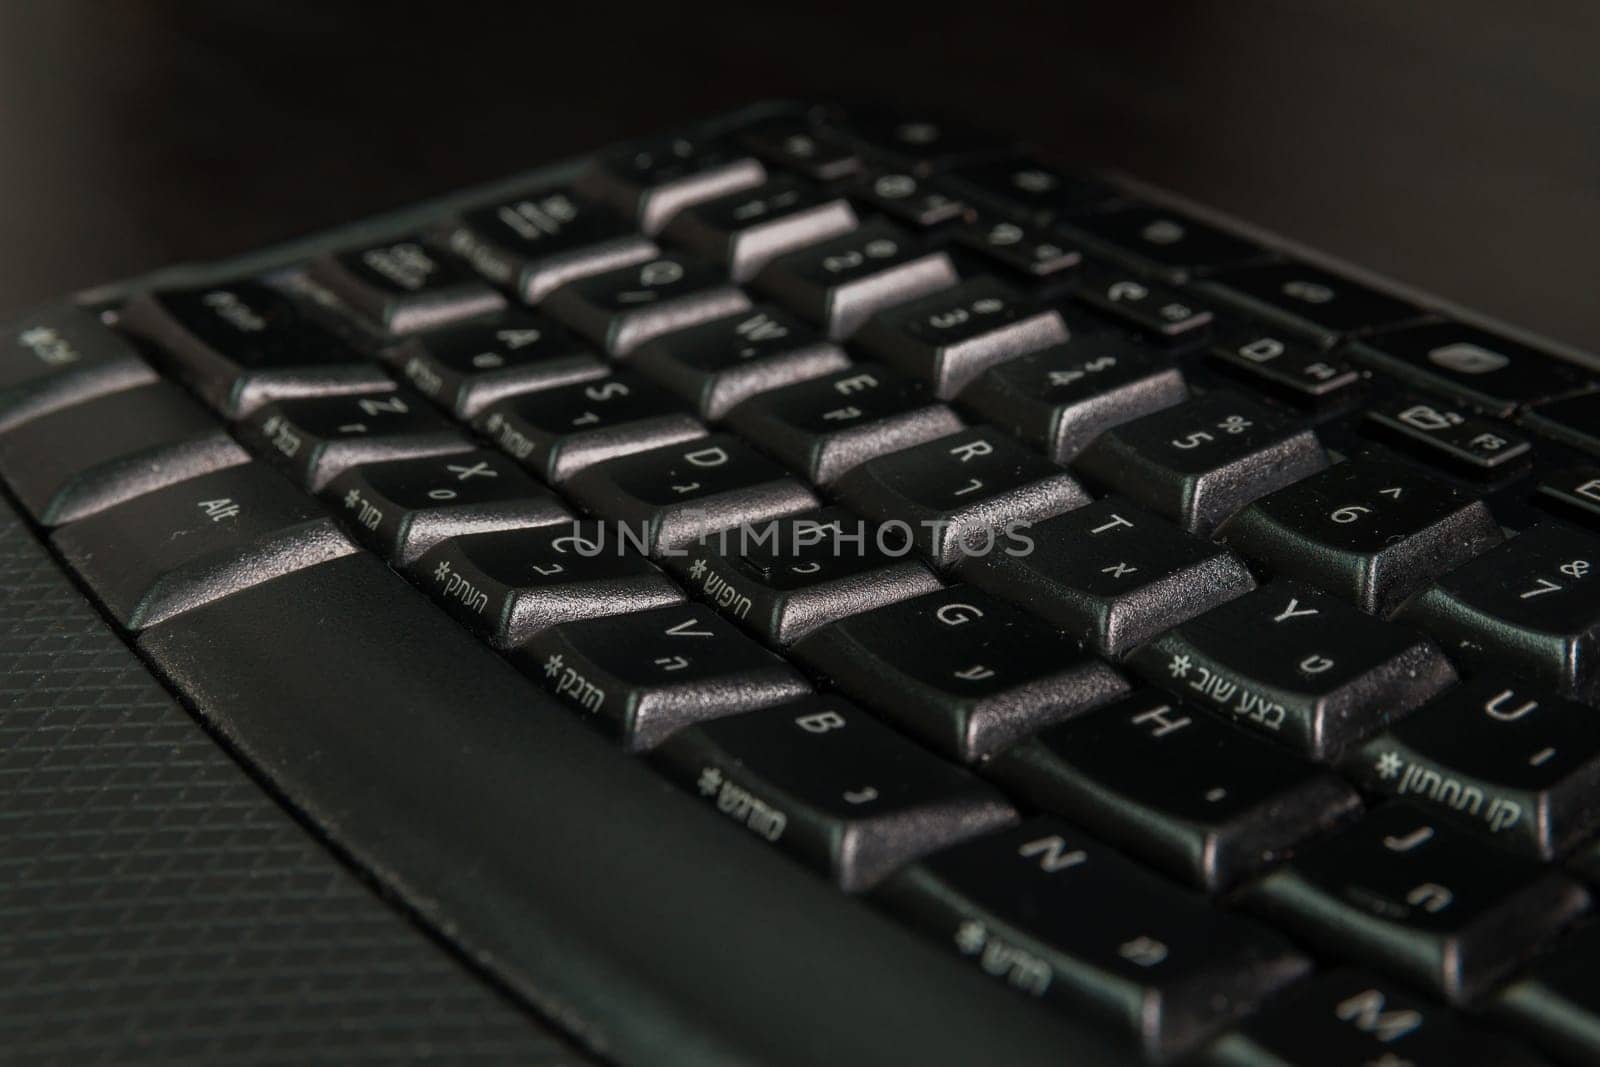 Keyboard with letters in Hebrew and English - Wireless keyboard - Close up 